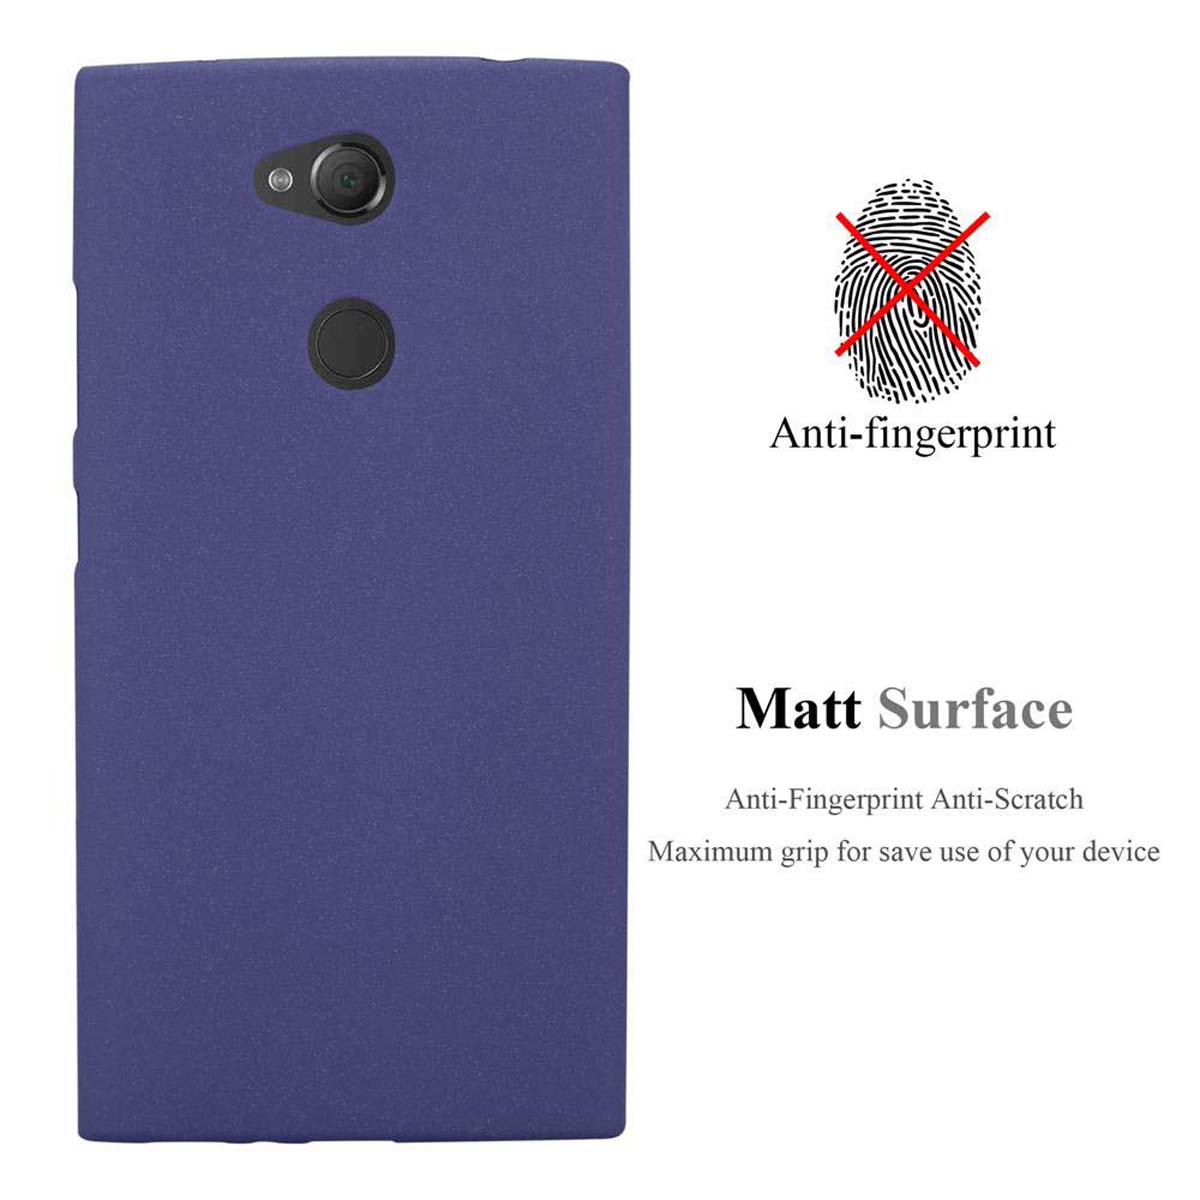 Backcover, DUNKEL TPU Sony, FROST L2, BLAU Schutzhülle, Xperia Frosted CADORABO